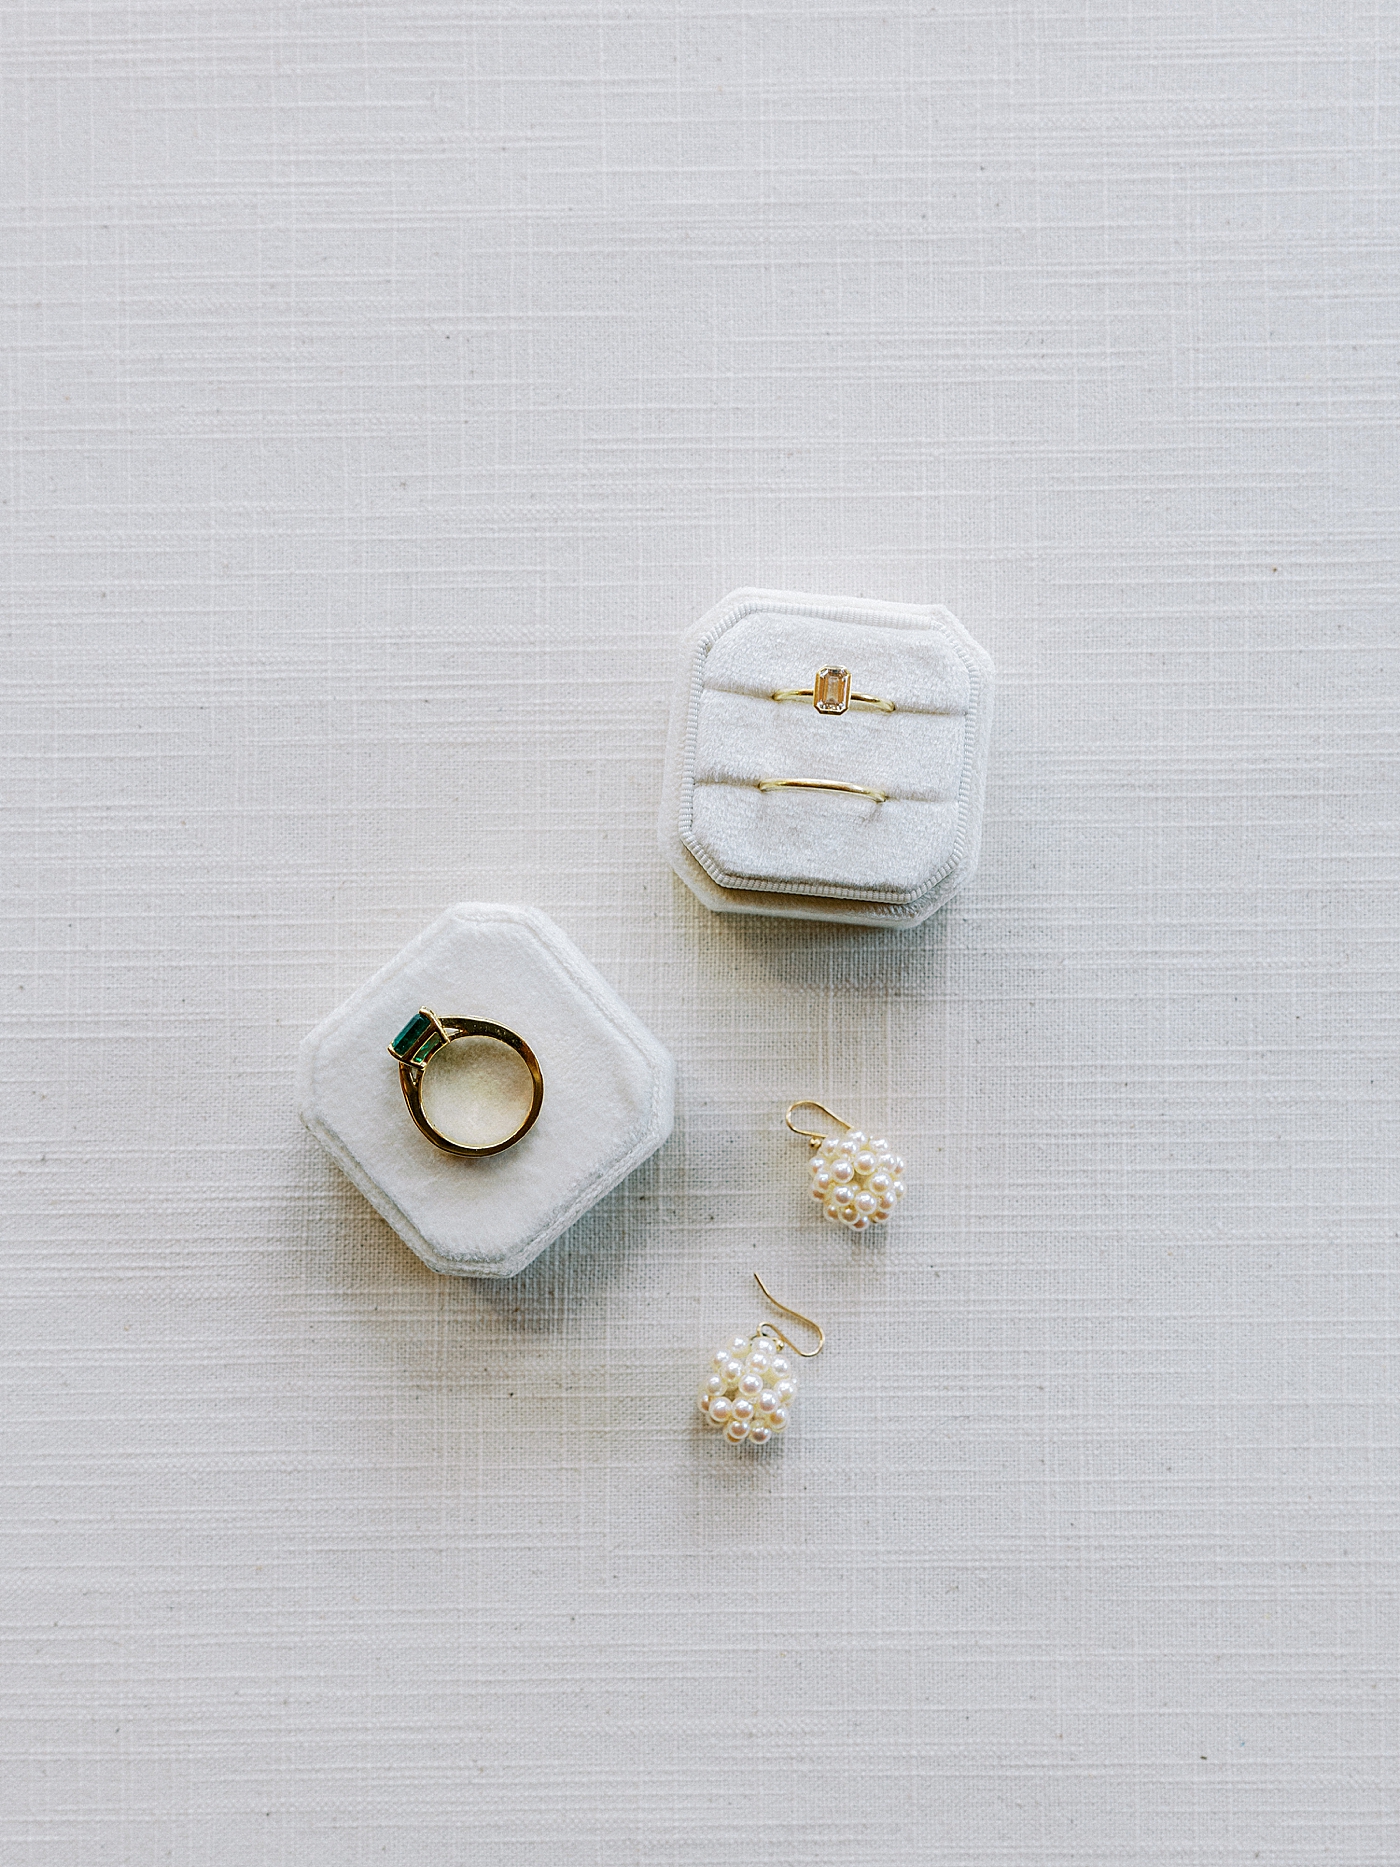 Bride's rings and earrings styled on a white surface | Photo by Diane Sotero Photography